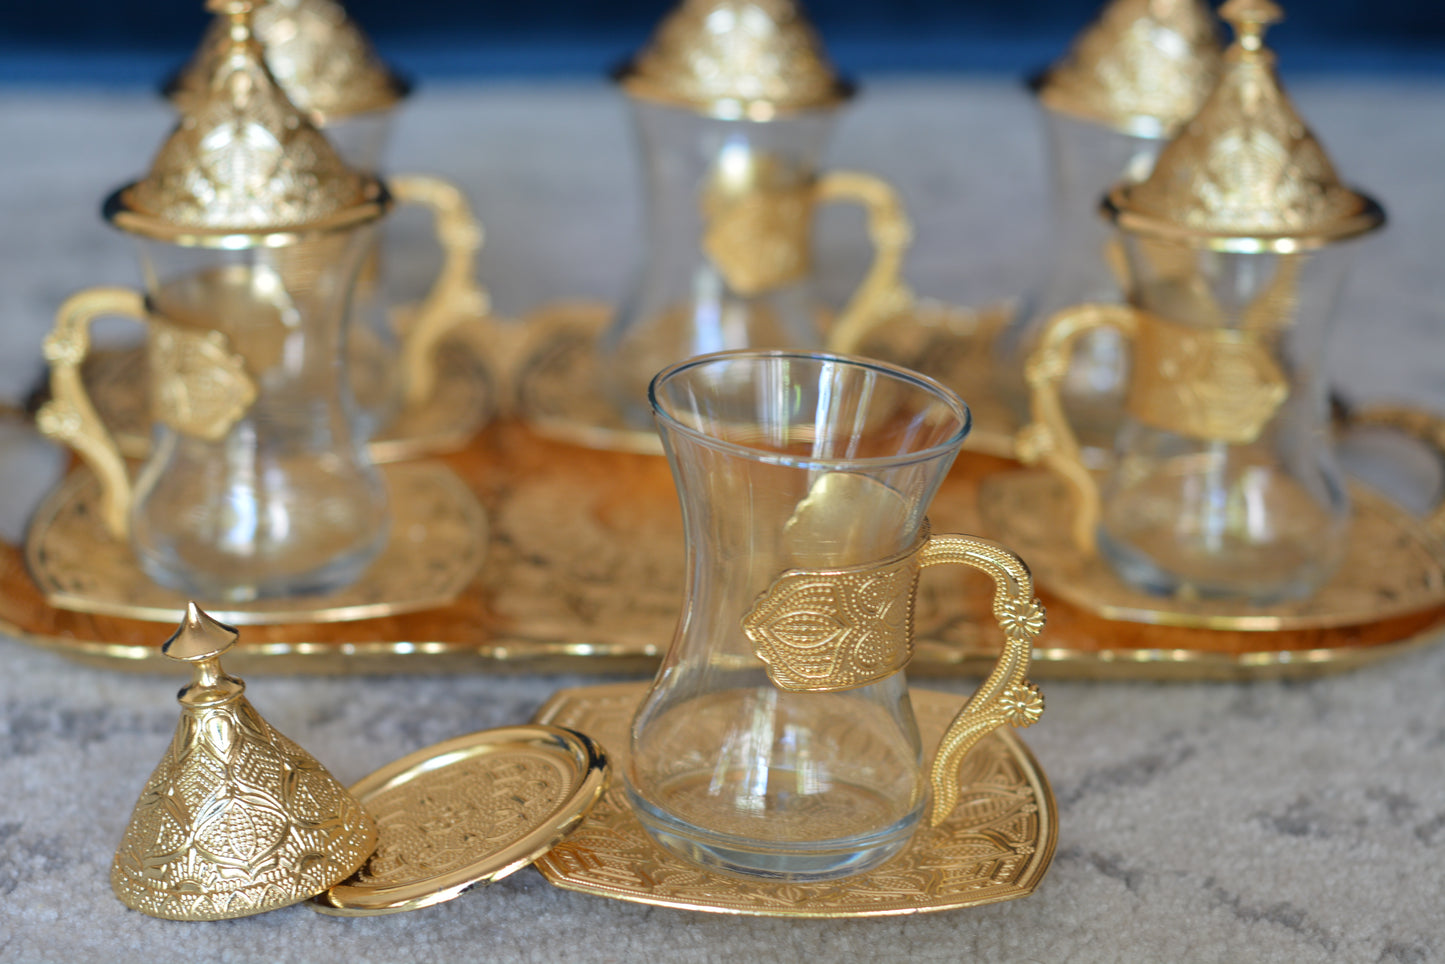 Premium Gold Turkish Tea Cups with Tops Serves 6